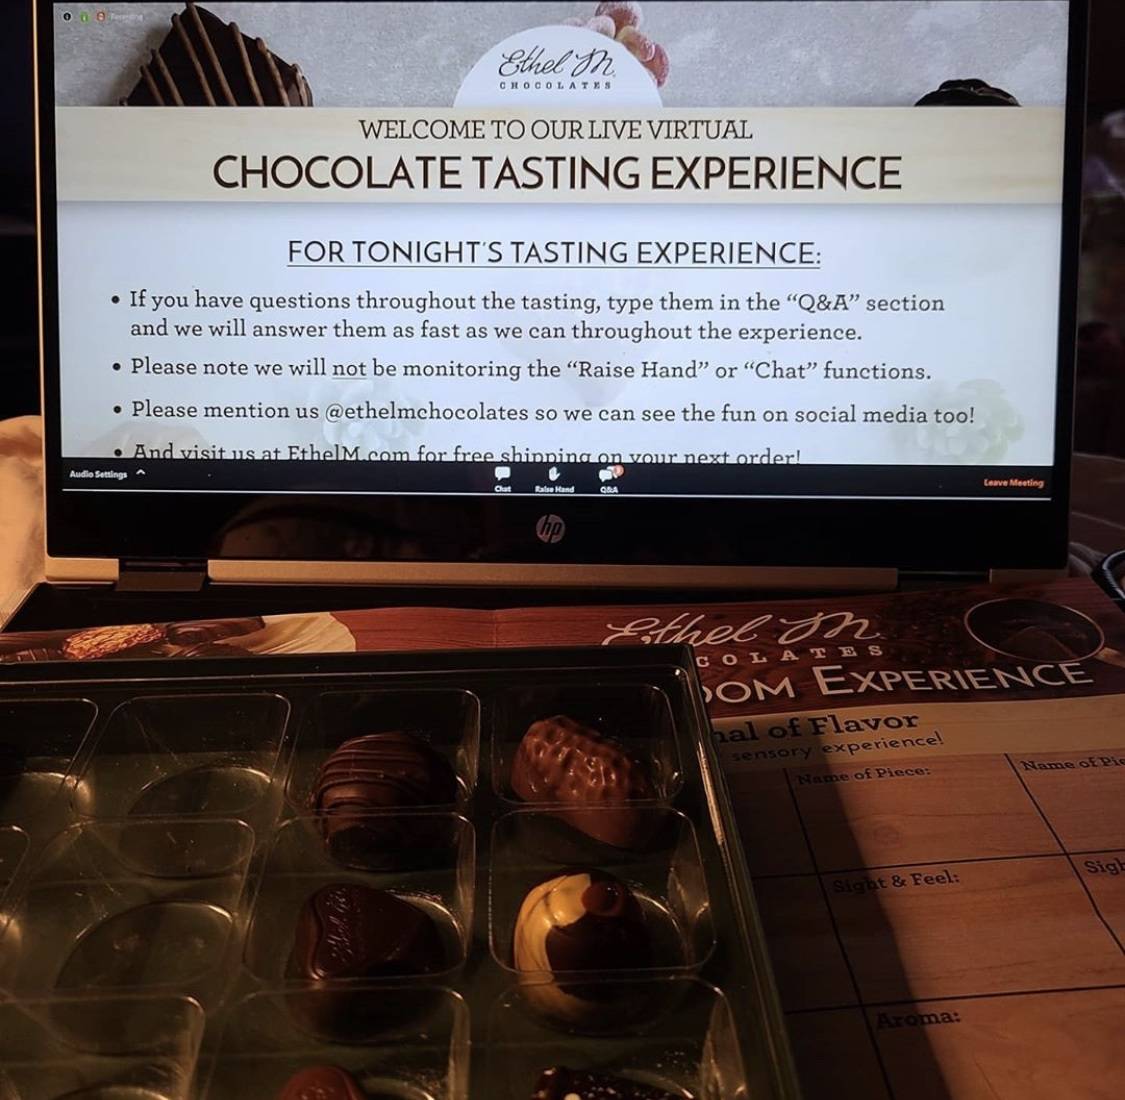 The virtual tastings are conducted on Zoom. (Ethel M Chocolates)